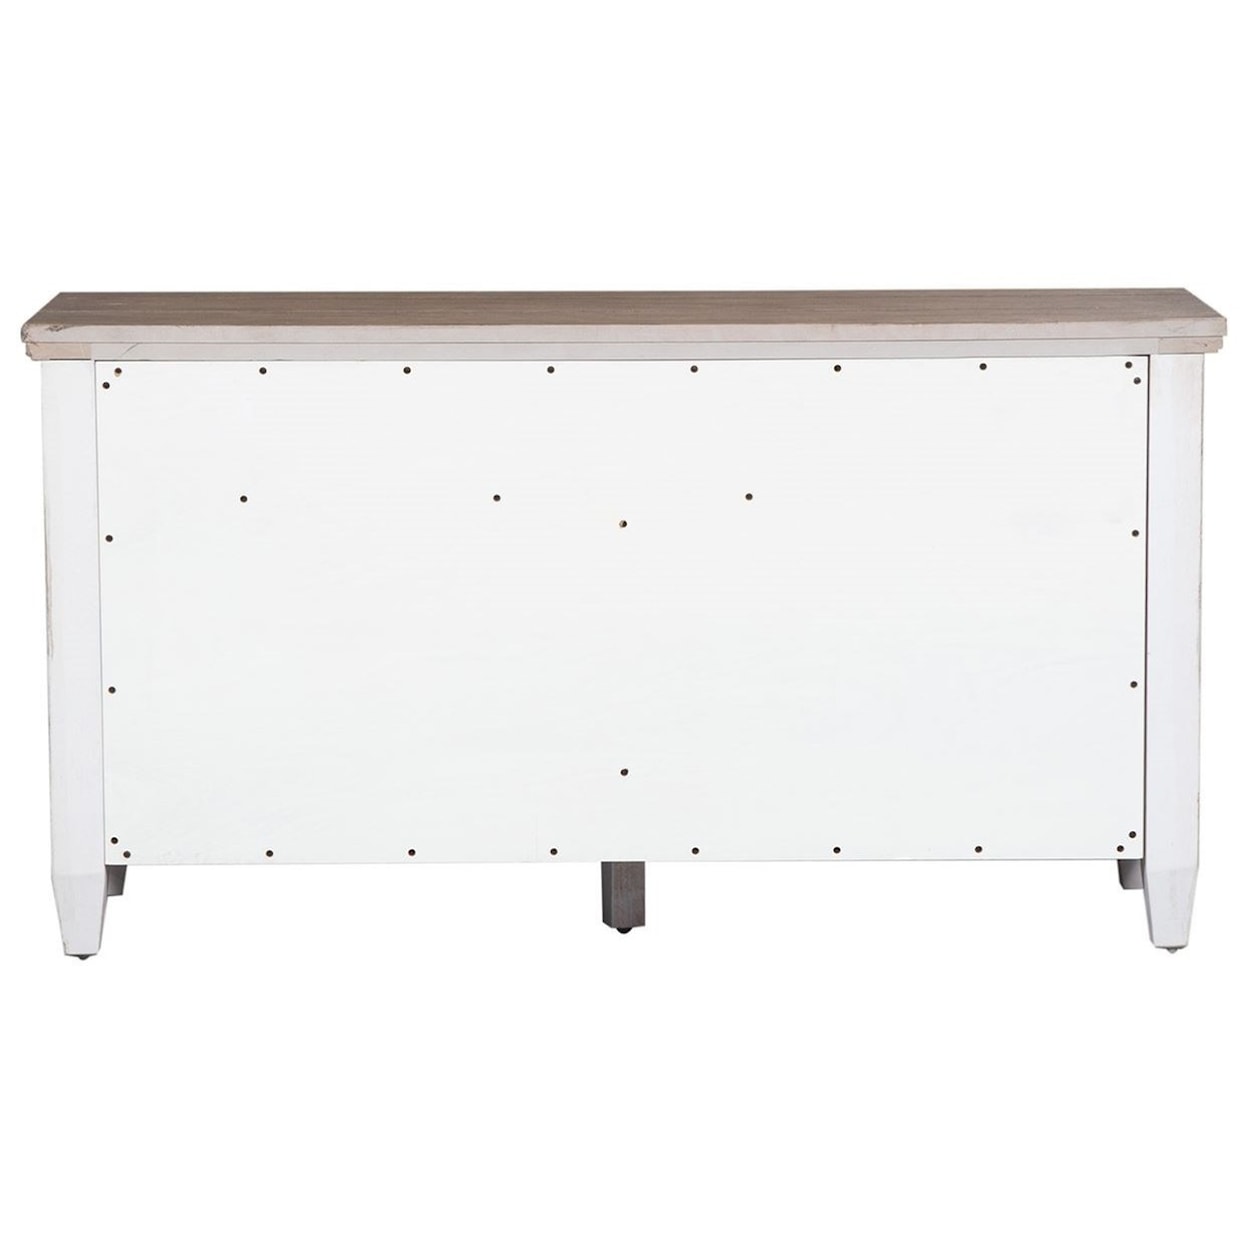 Libby Haven 5-Drawer Credenza